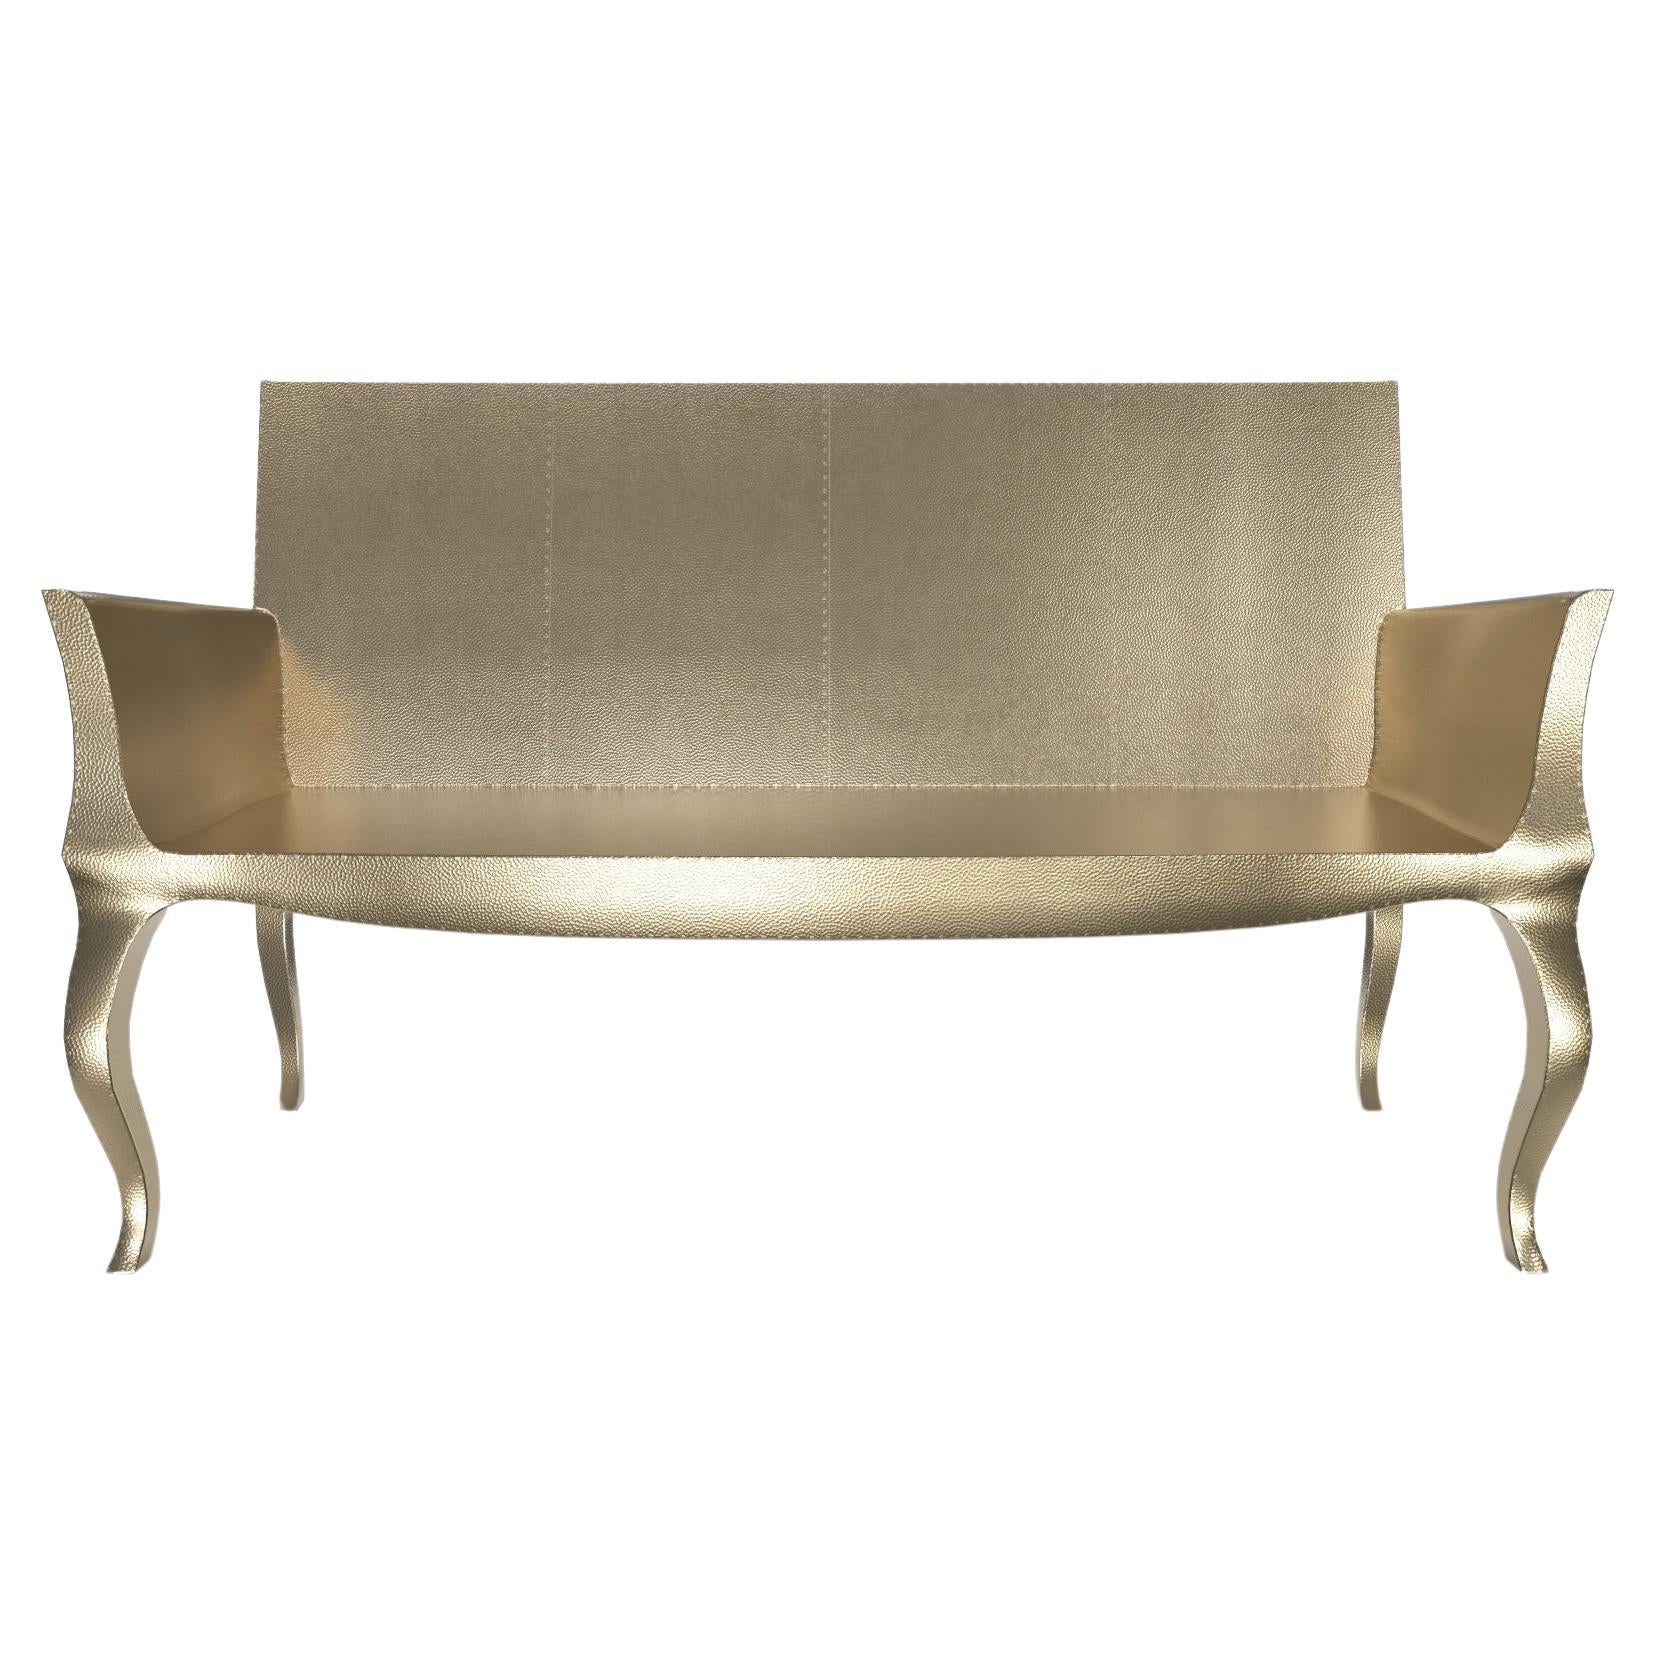 Louise Settee Art Deco Lounge Chairs in Mid. Hammered Brass by Paul Mathieu For Sale